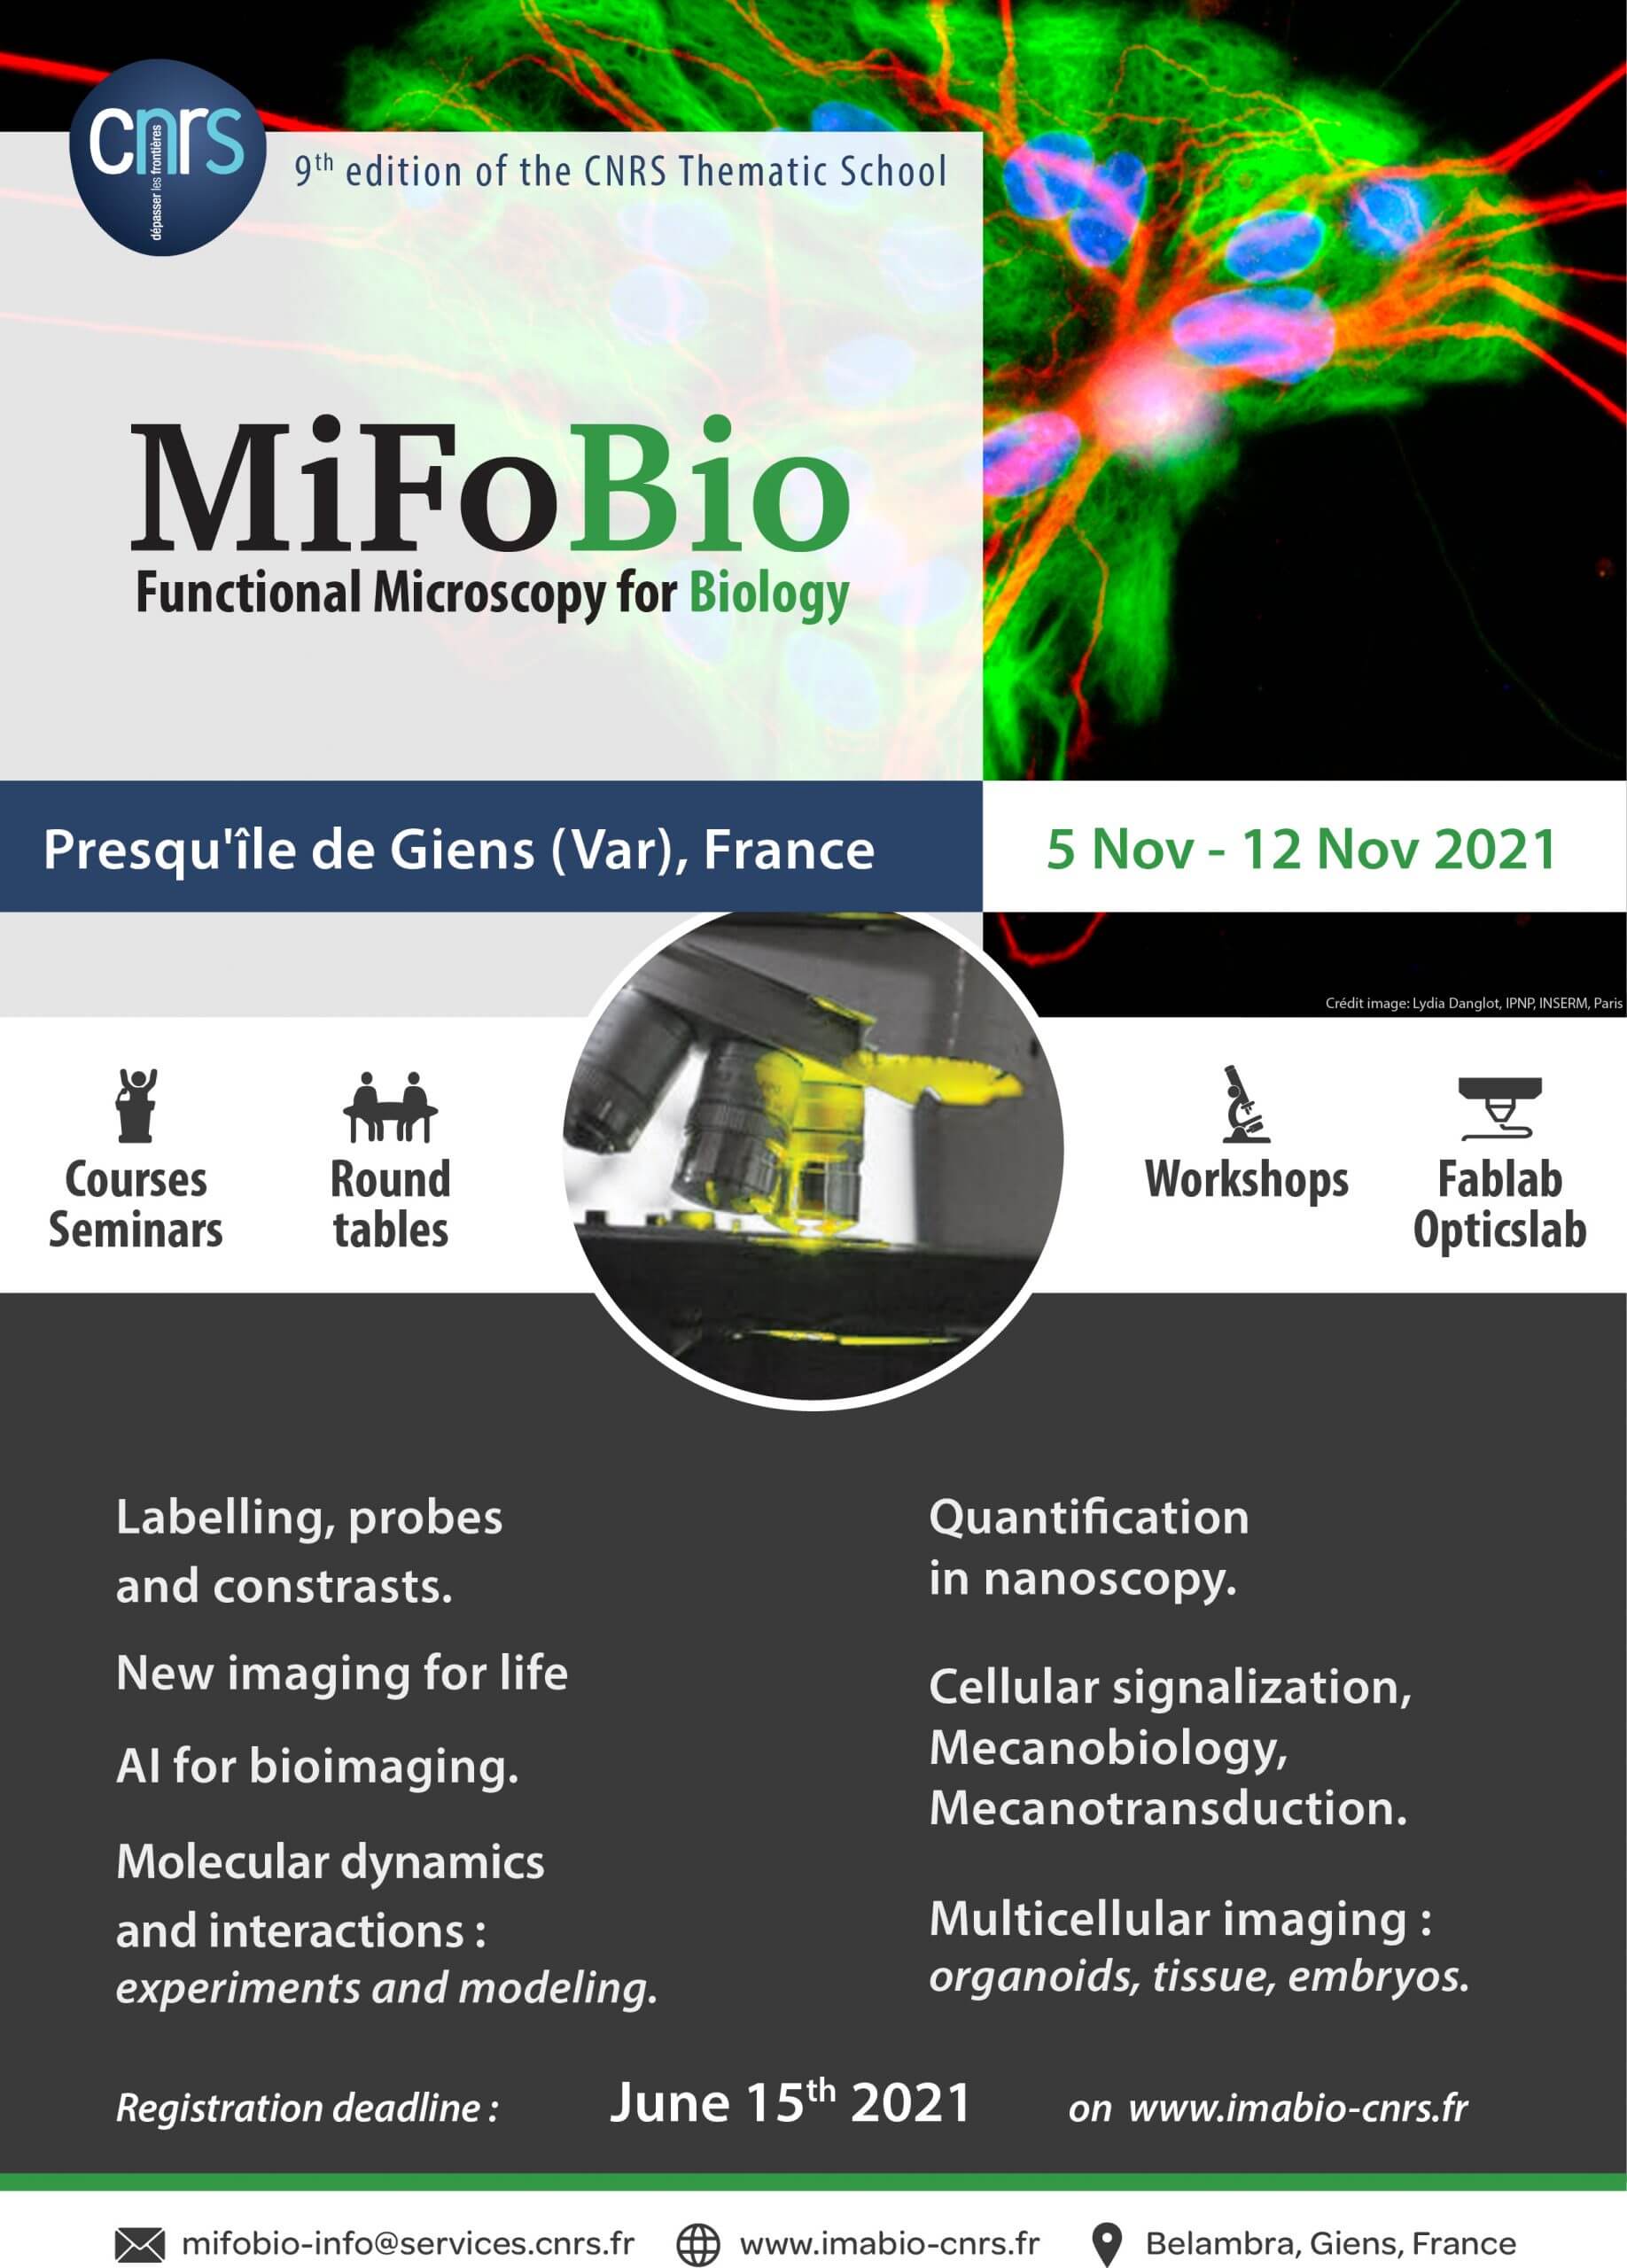 Join abberior at MiFoBio 2021 in Giens